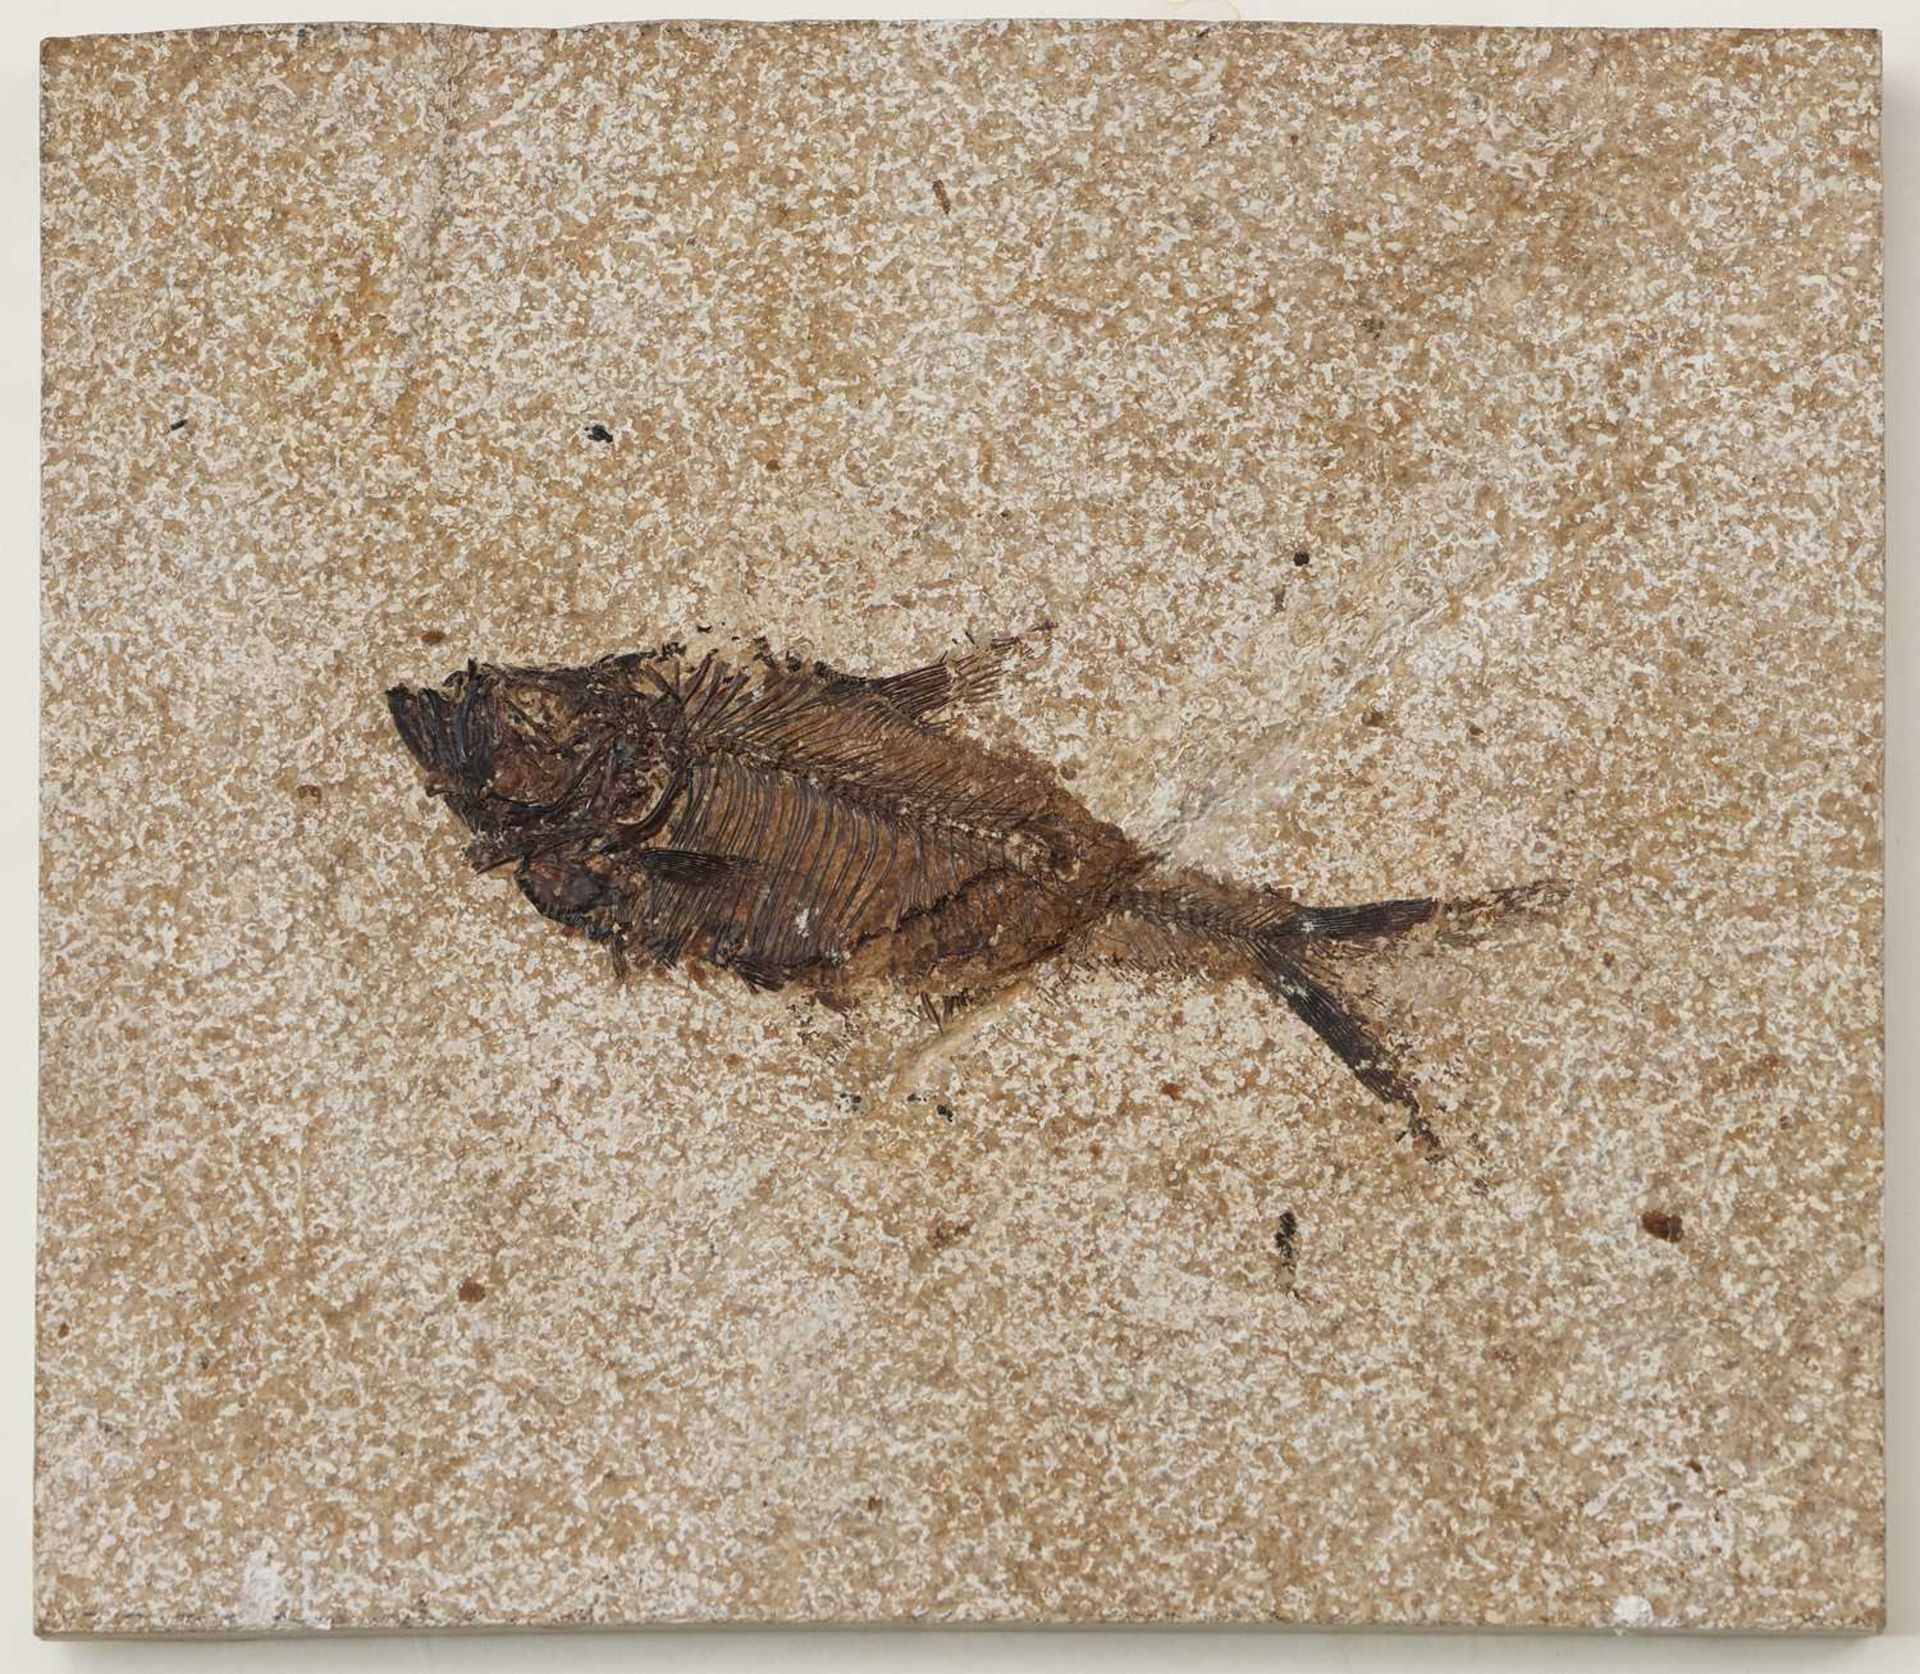 3 Fossilien "Fische" - Image 5 of 5